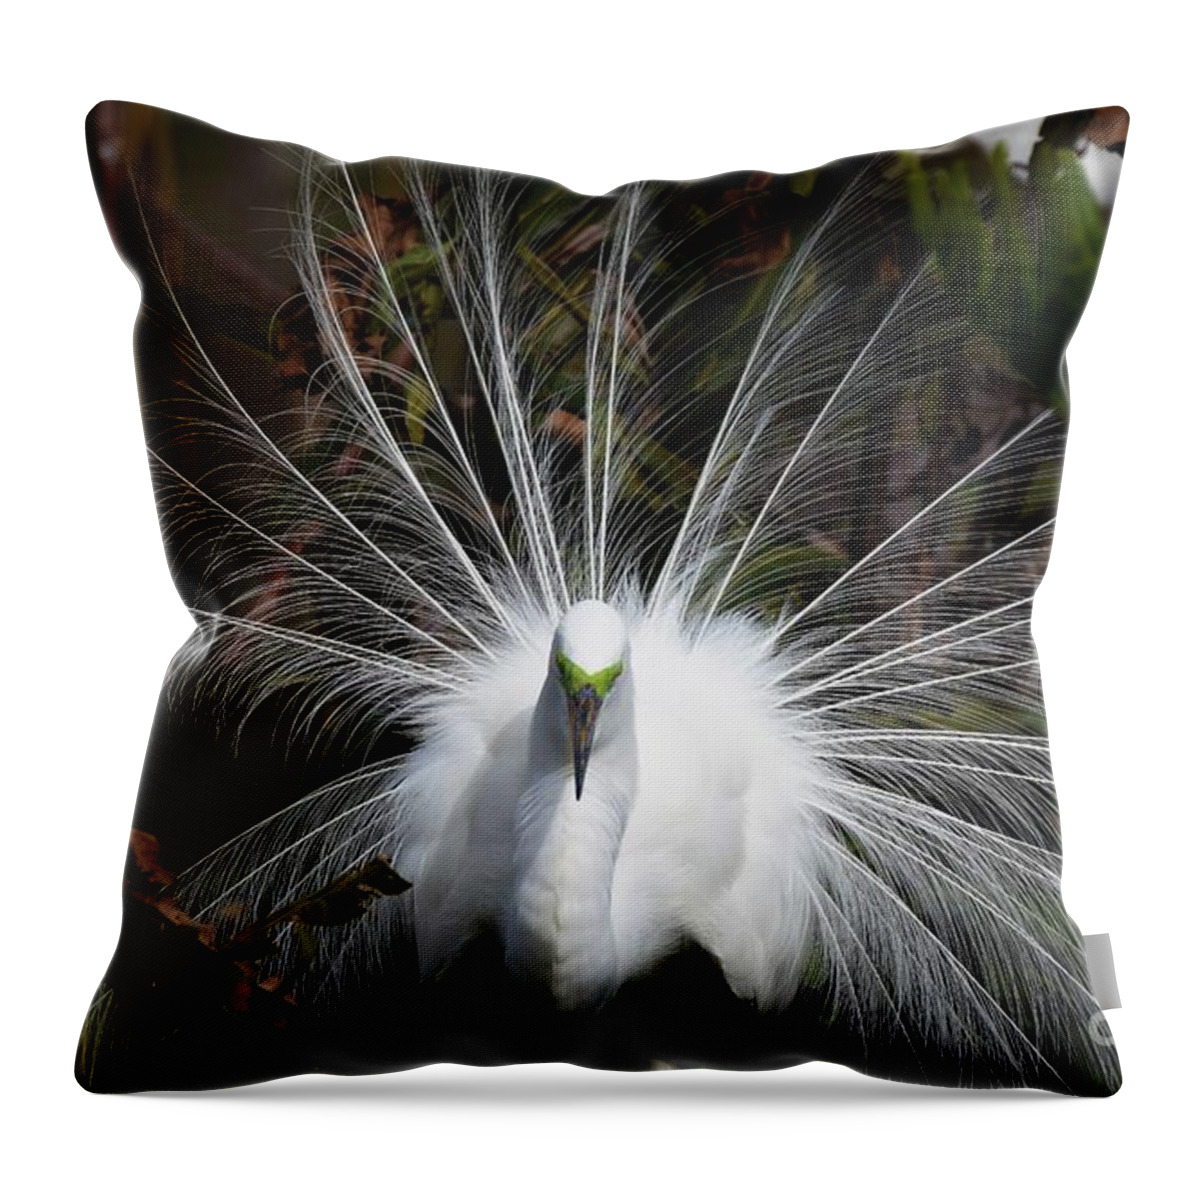 Great Egret Throw Pillow featuring the photograph All Fanned Out by Julie Adair